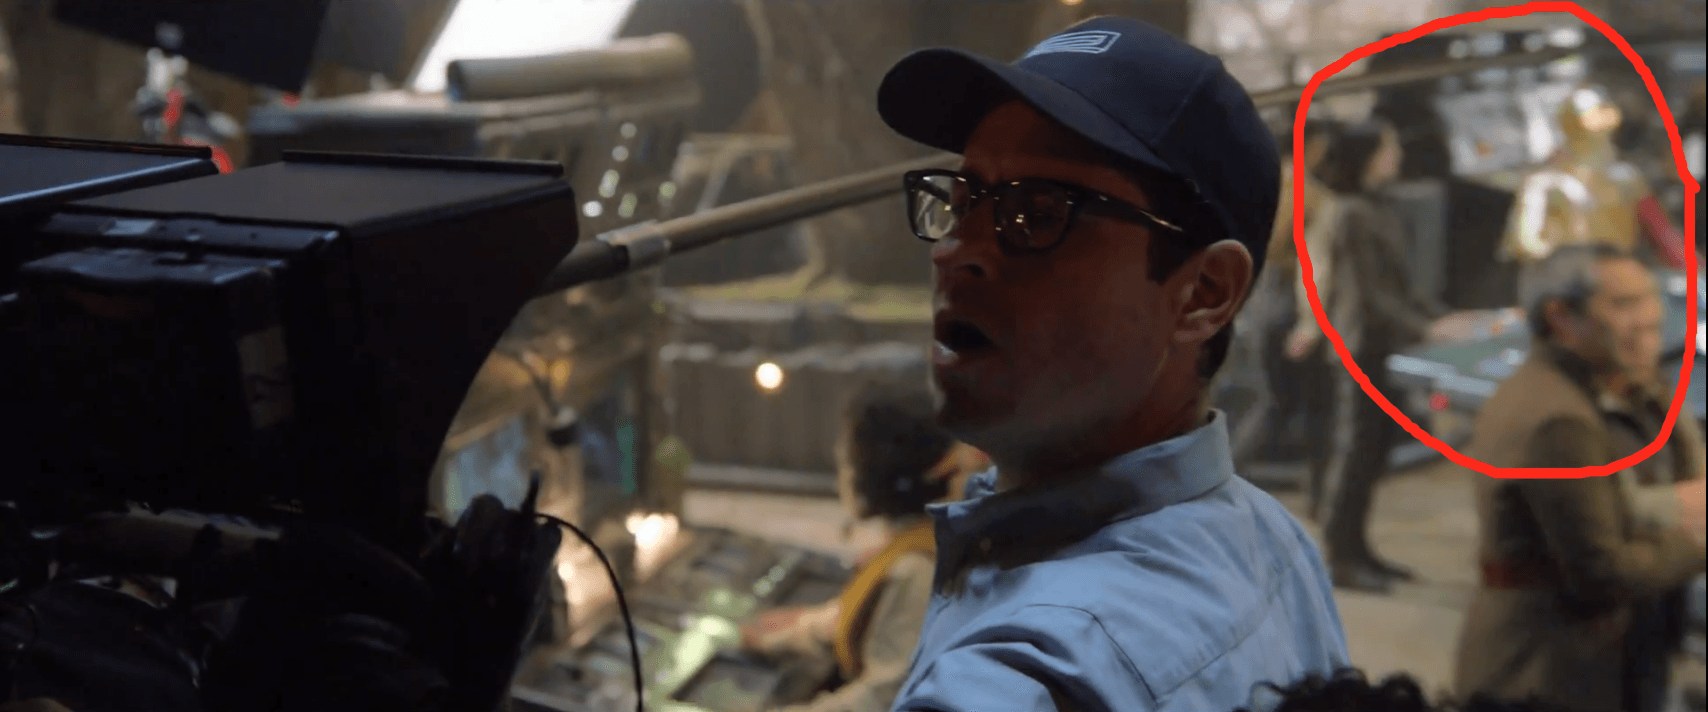 Star Wars: The Force Awakens Behind the Scenes Photos & Tech Specs